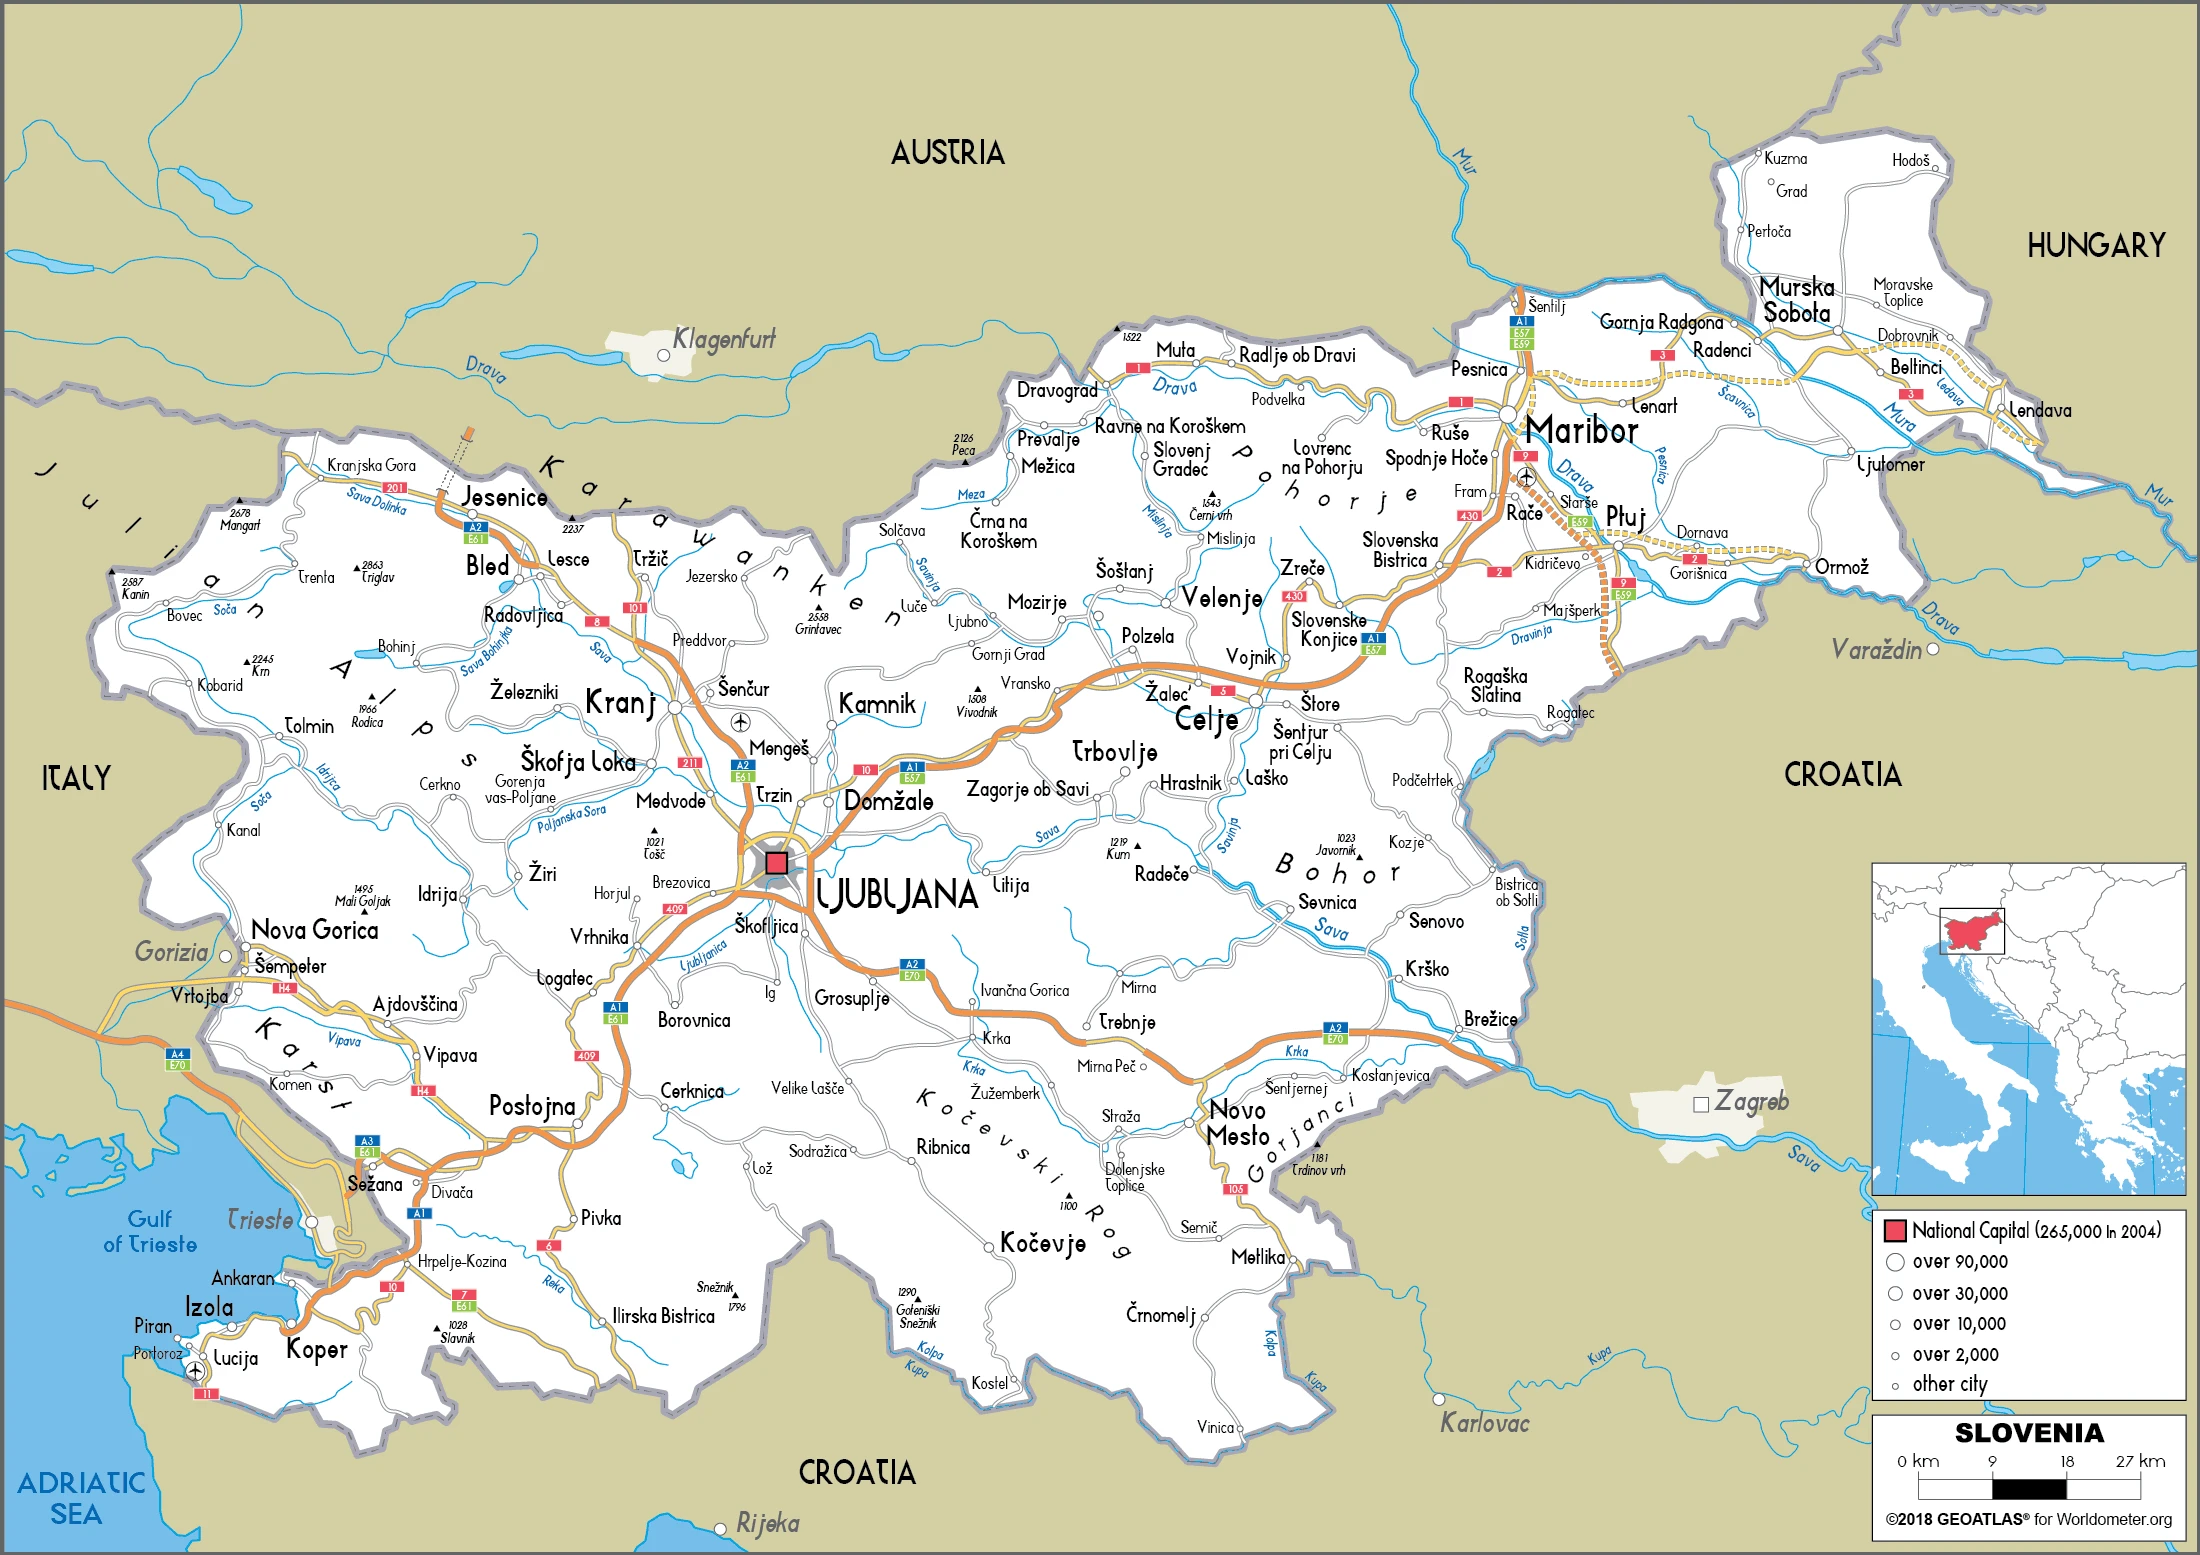 The route plan of the Slovenian roadways.